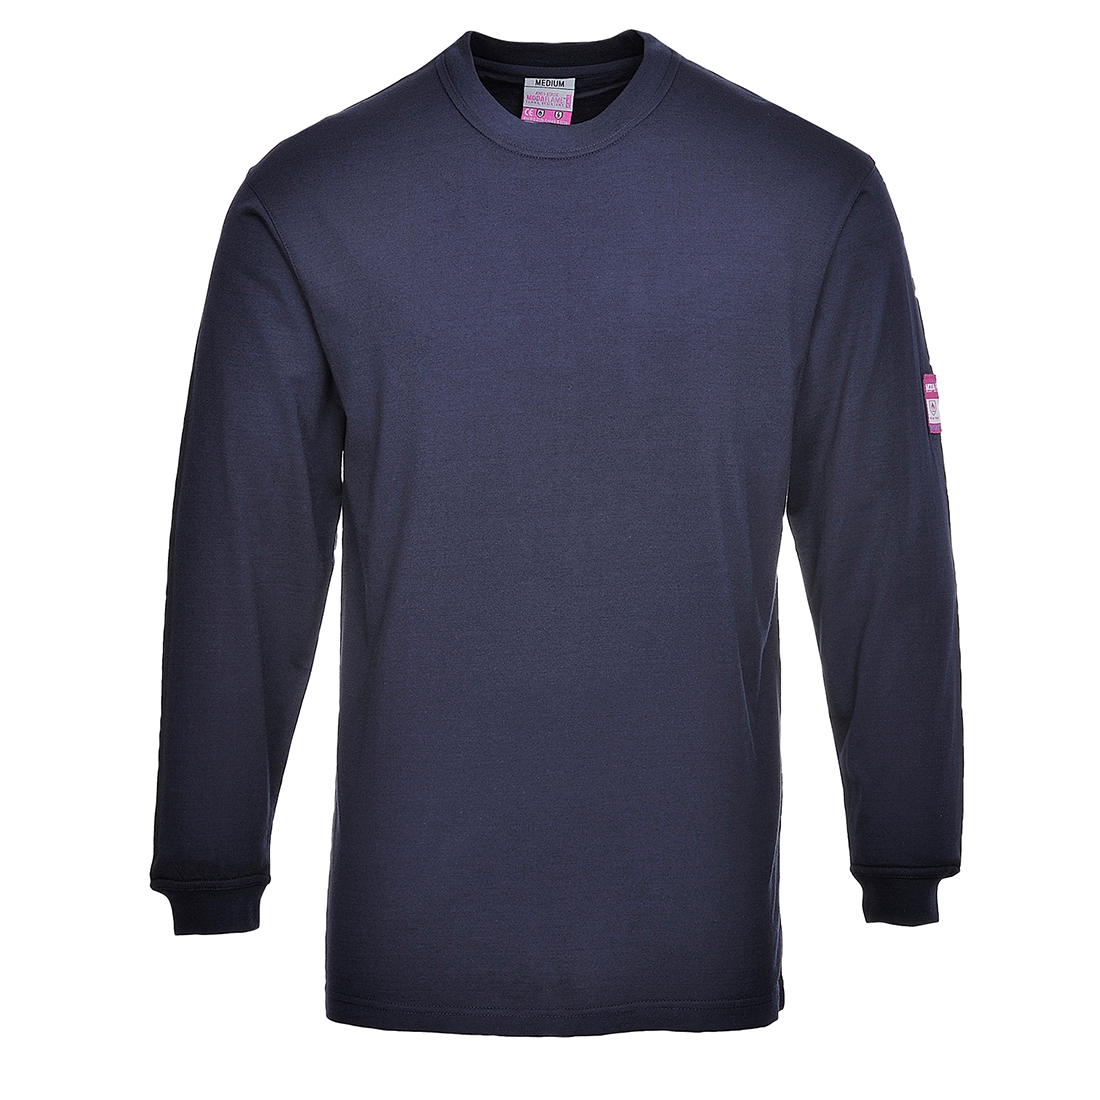 Flame Resistant Anti-Static Long Sleeve T-Shirt - Navy